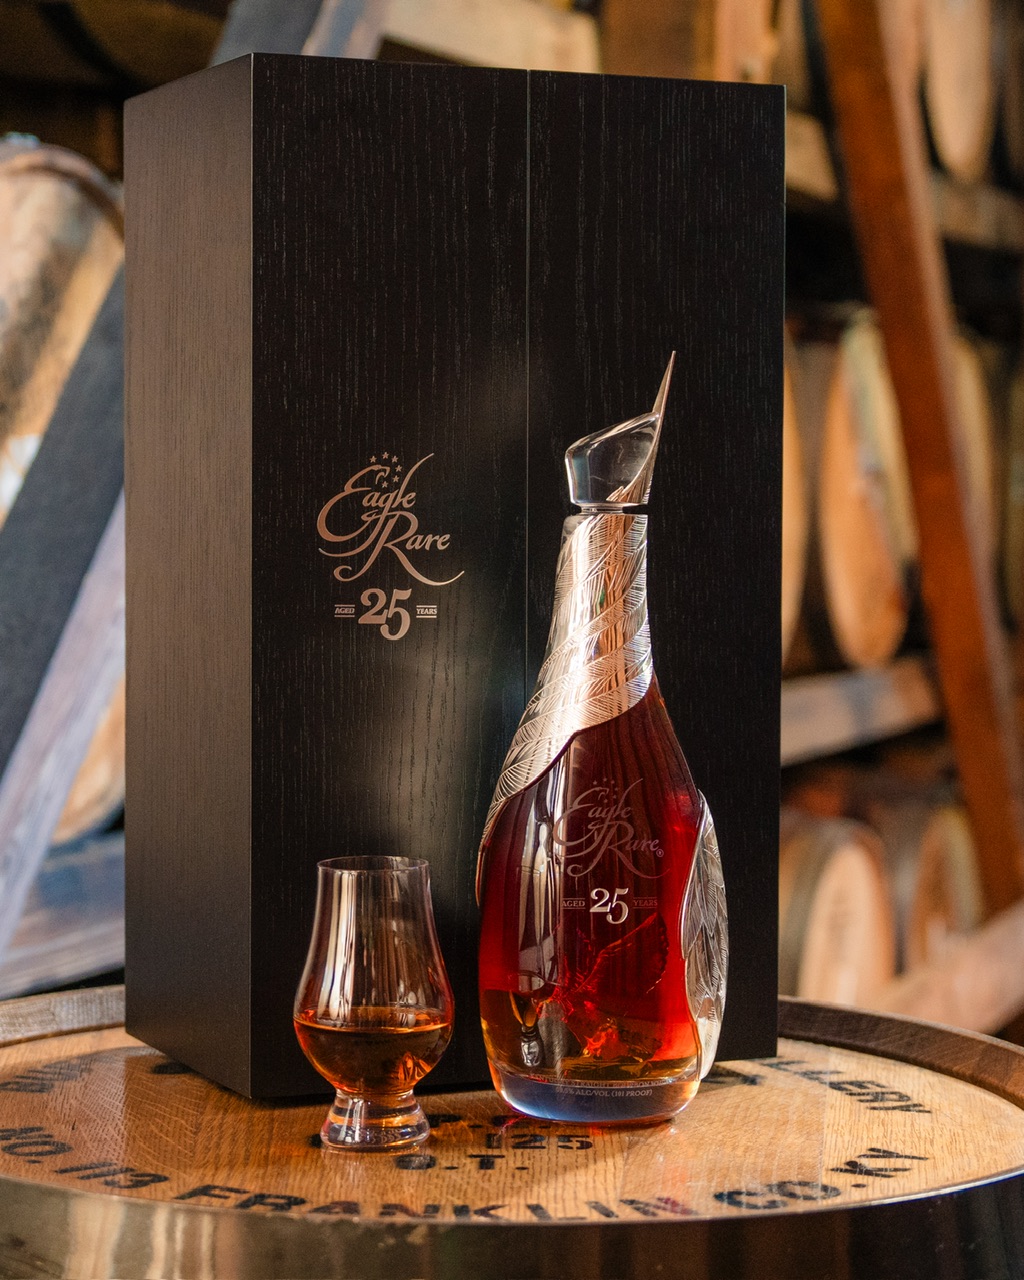 Extravagant New $10,000 Eagle Rare Kentucky Bourbon Aged for 25 Years